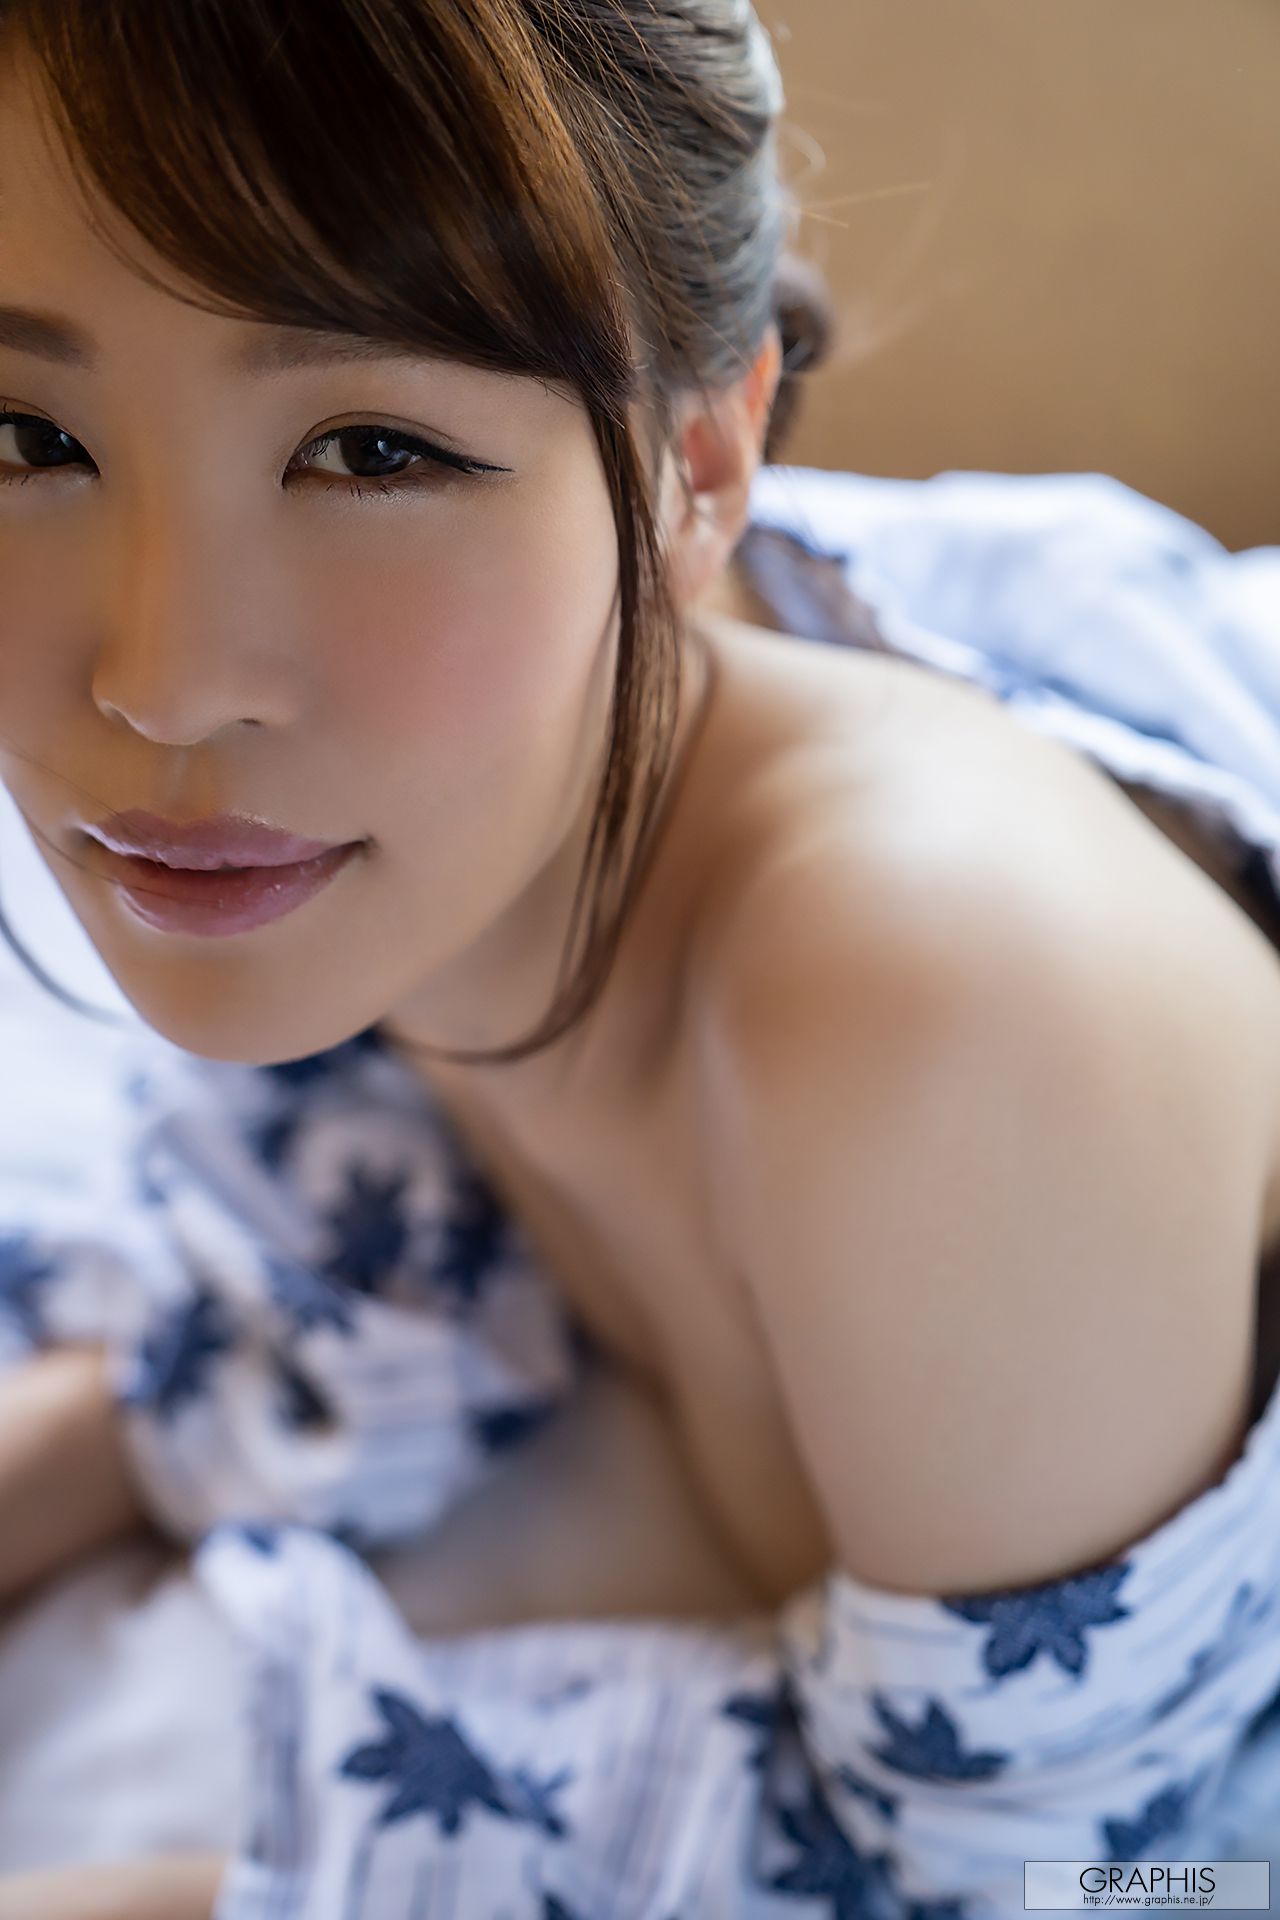 [Graphis] Special Gravure Tsumugi Toka Rinne 凛音とうか Private Affairs  第39张